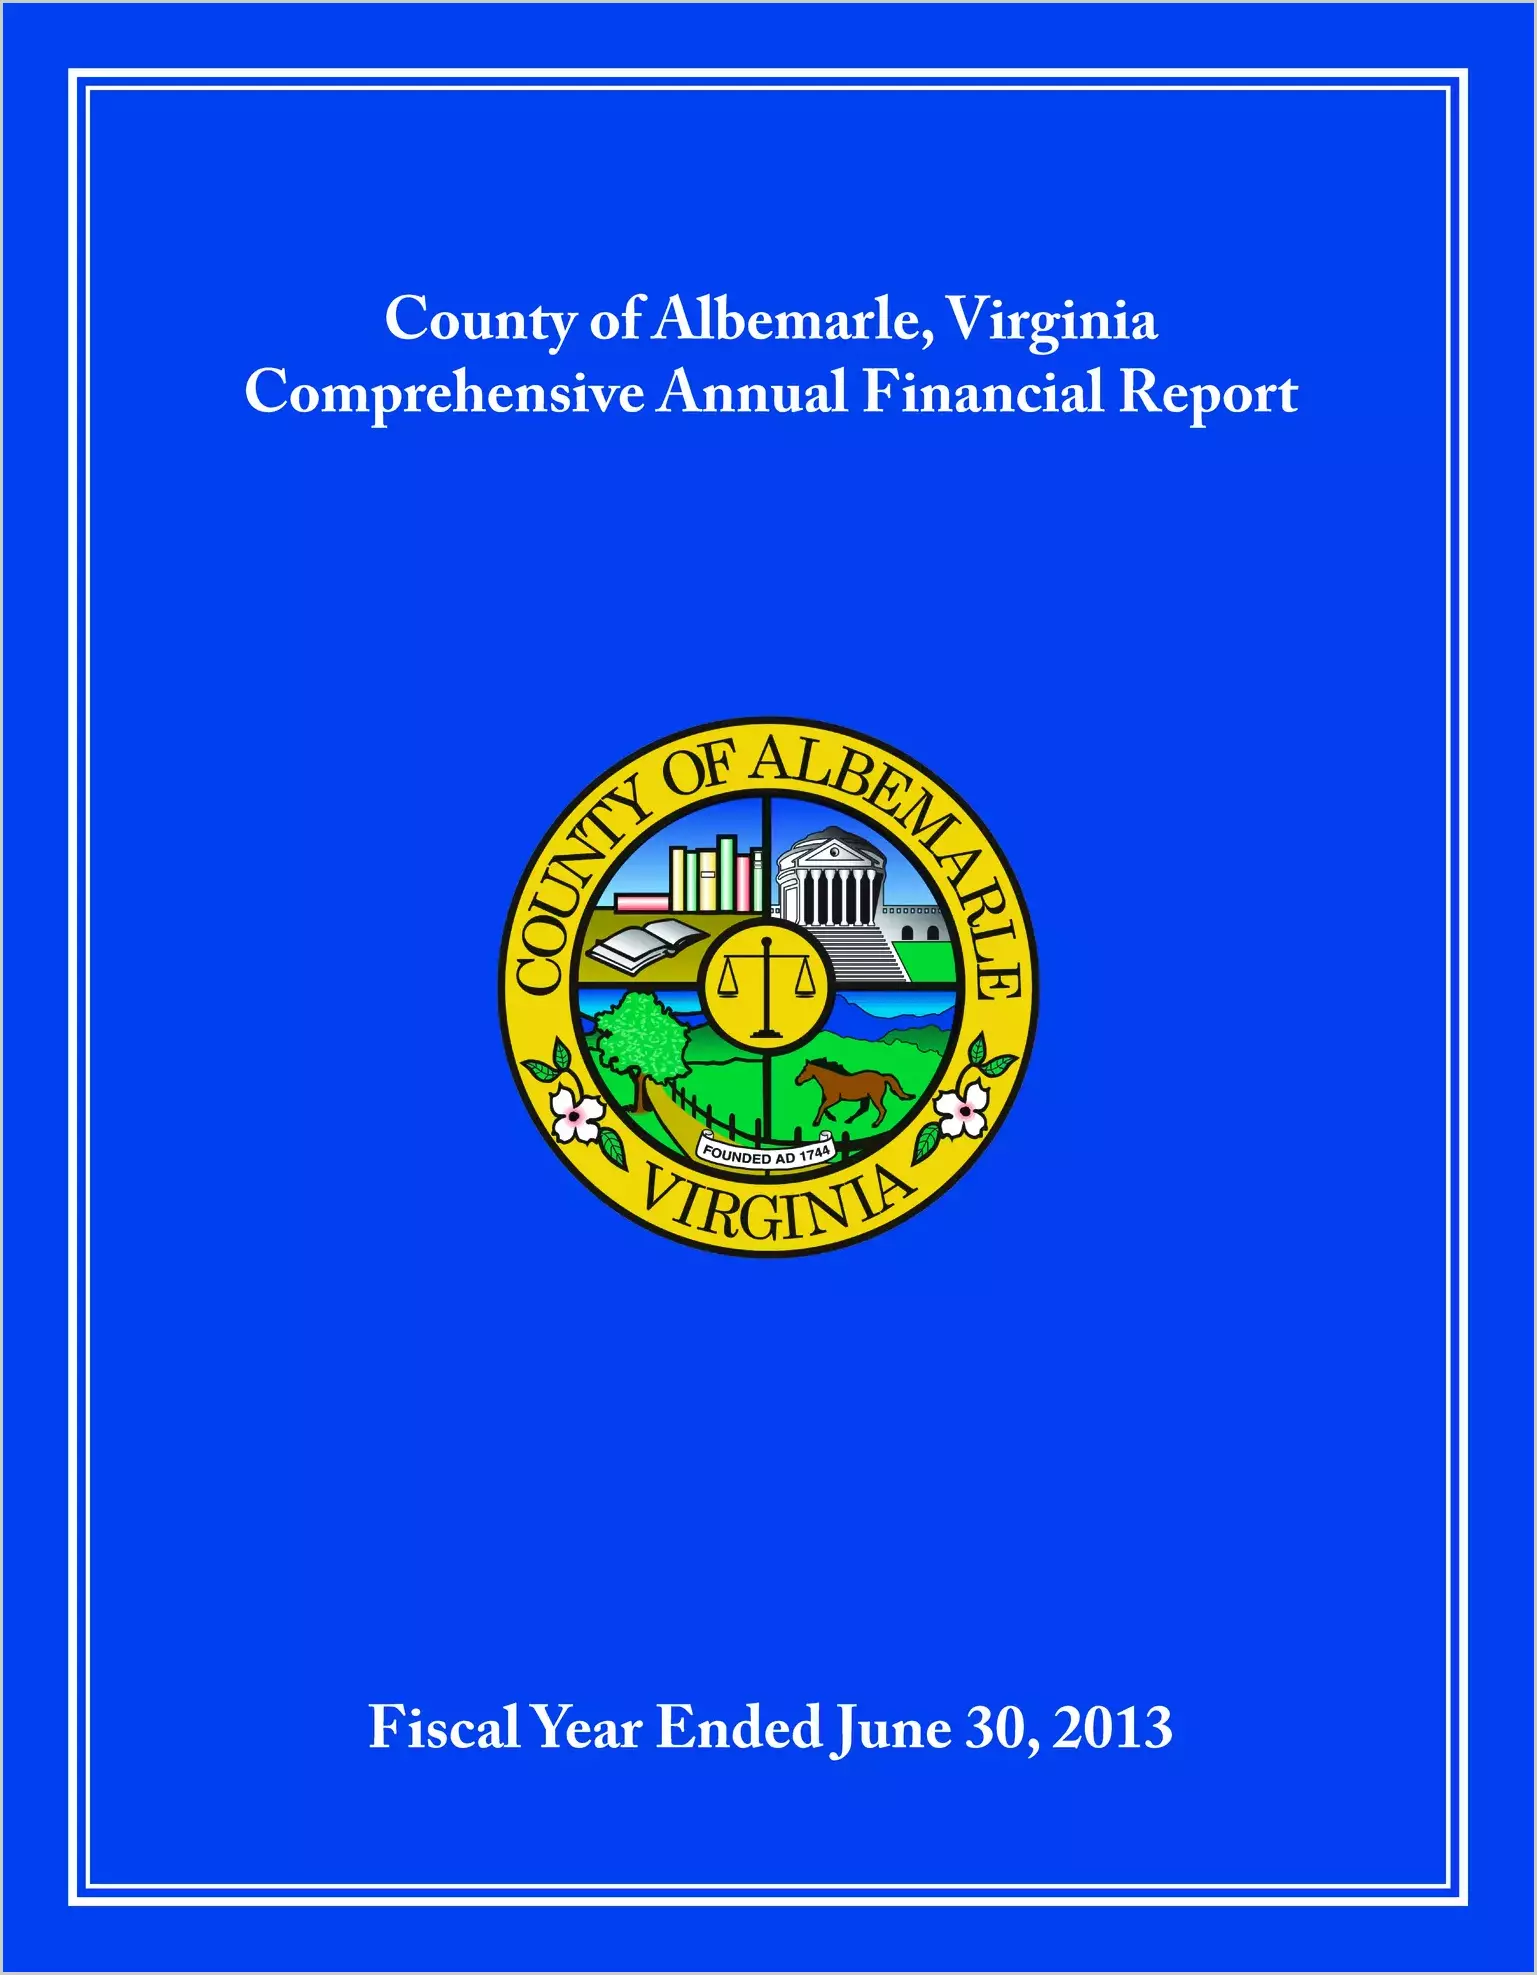 2013 Annual Financial Report for County of Albemarle